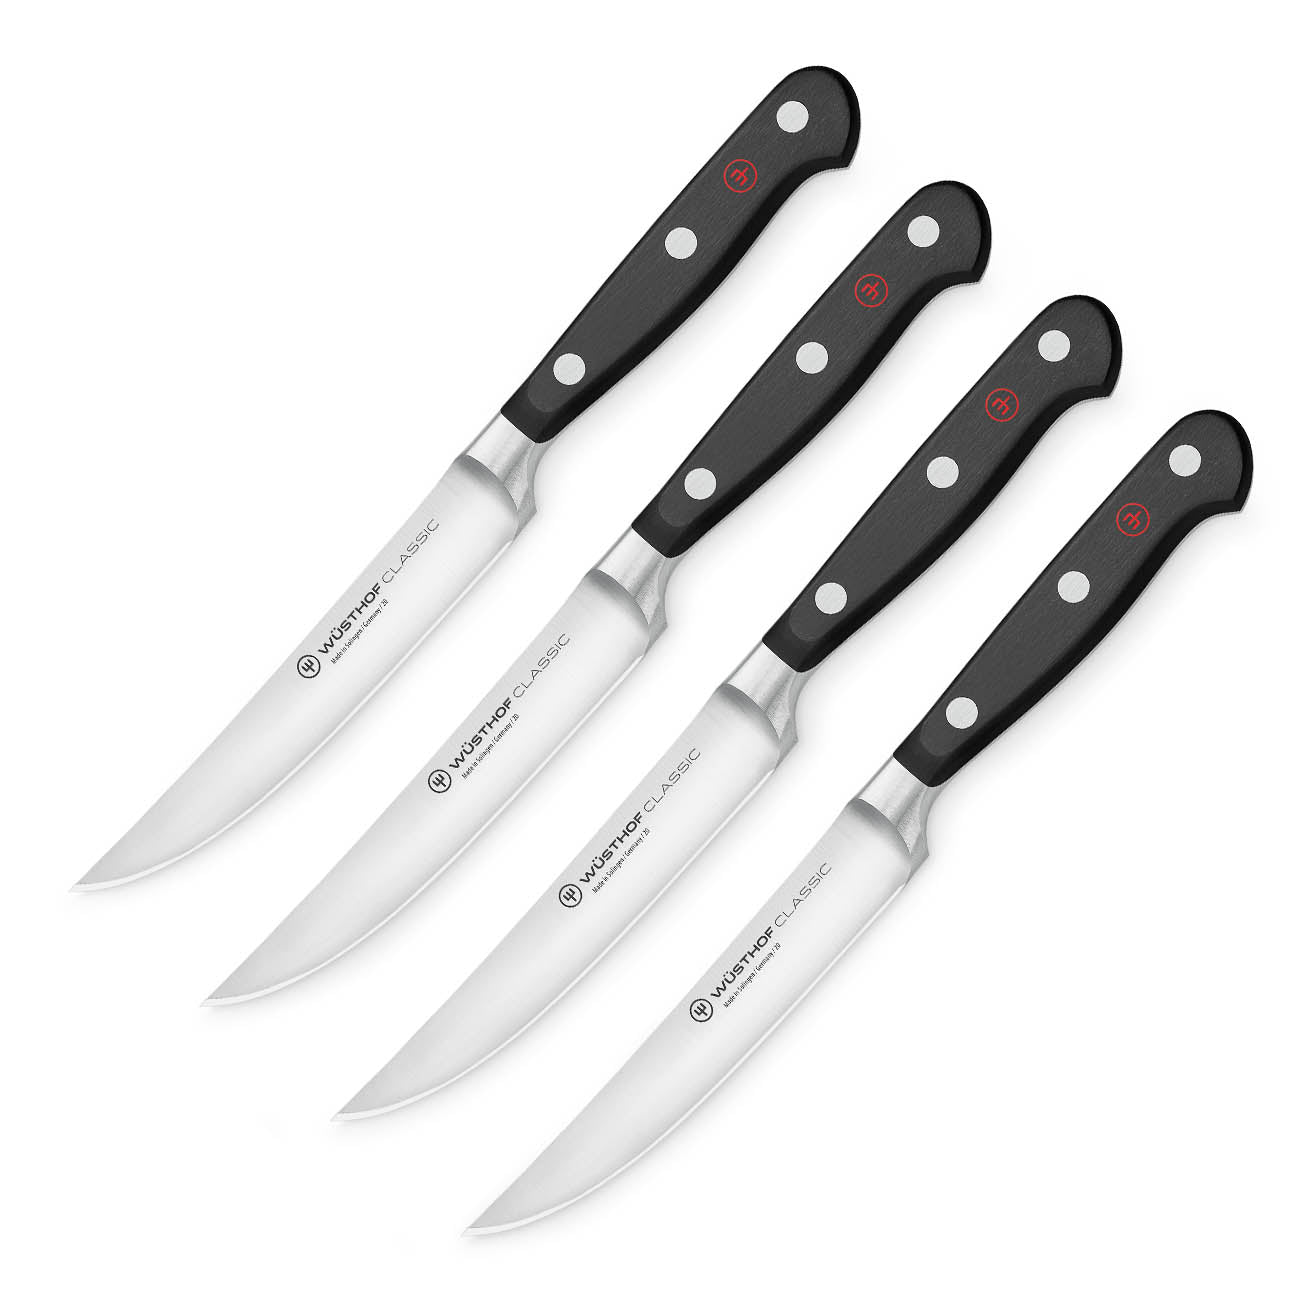 Wusthof Classic White Steak Knives - 4 Piece Set – Cutlery and More